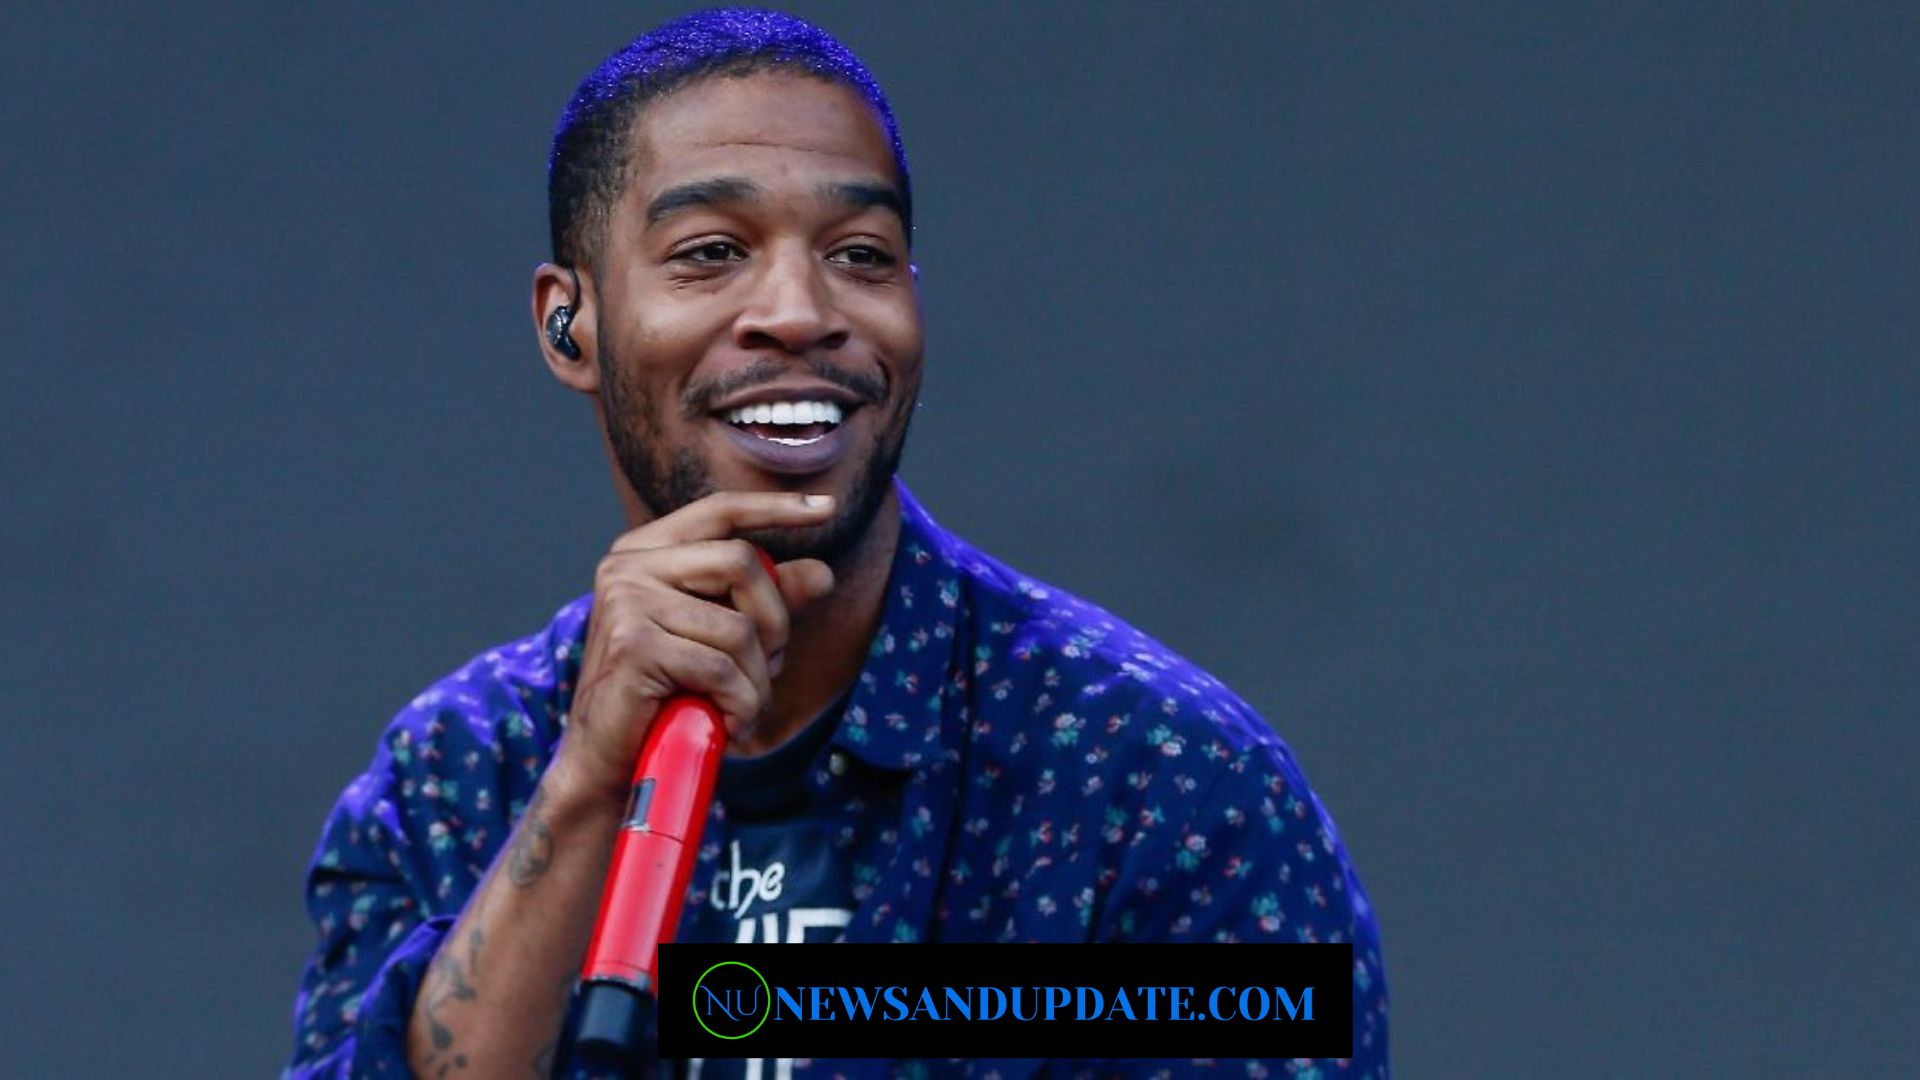 Who Is Kid Cudi Dating In 2022? All You Need To Know!